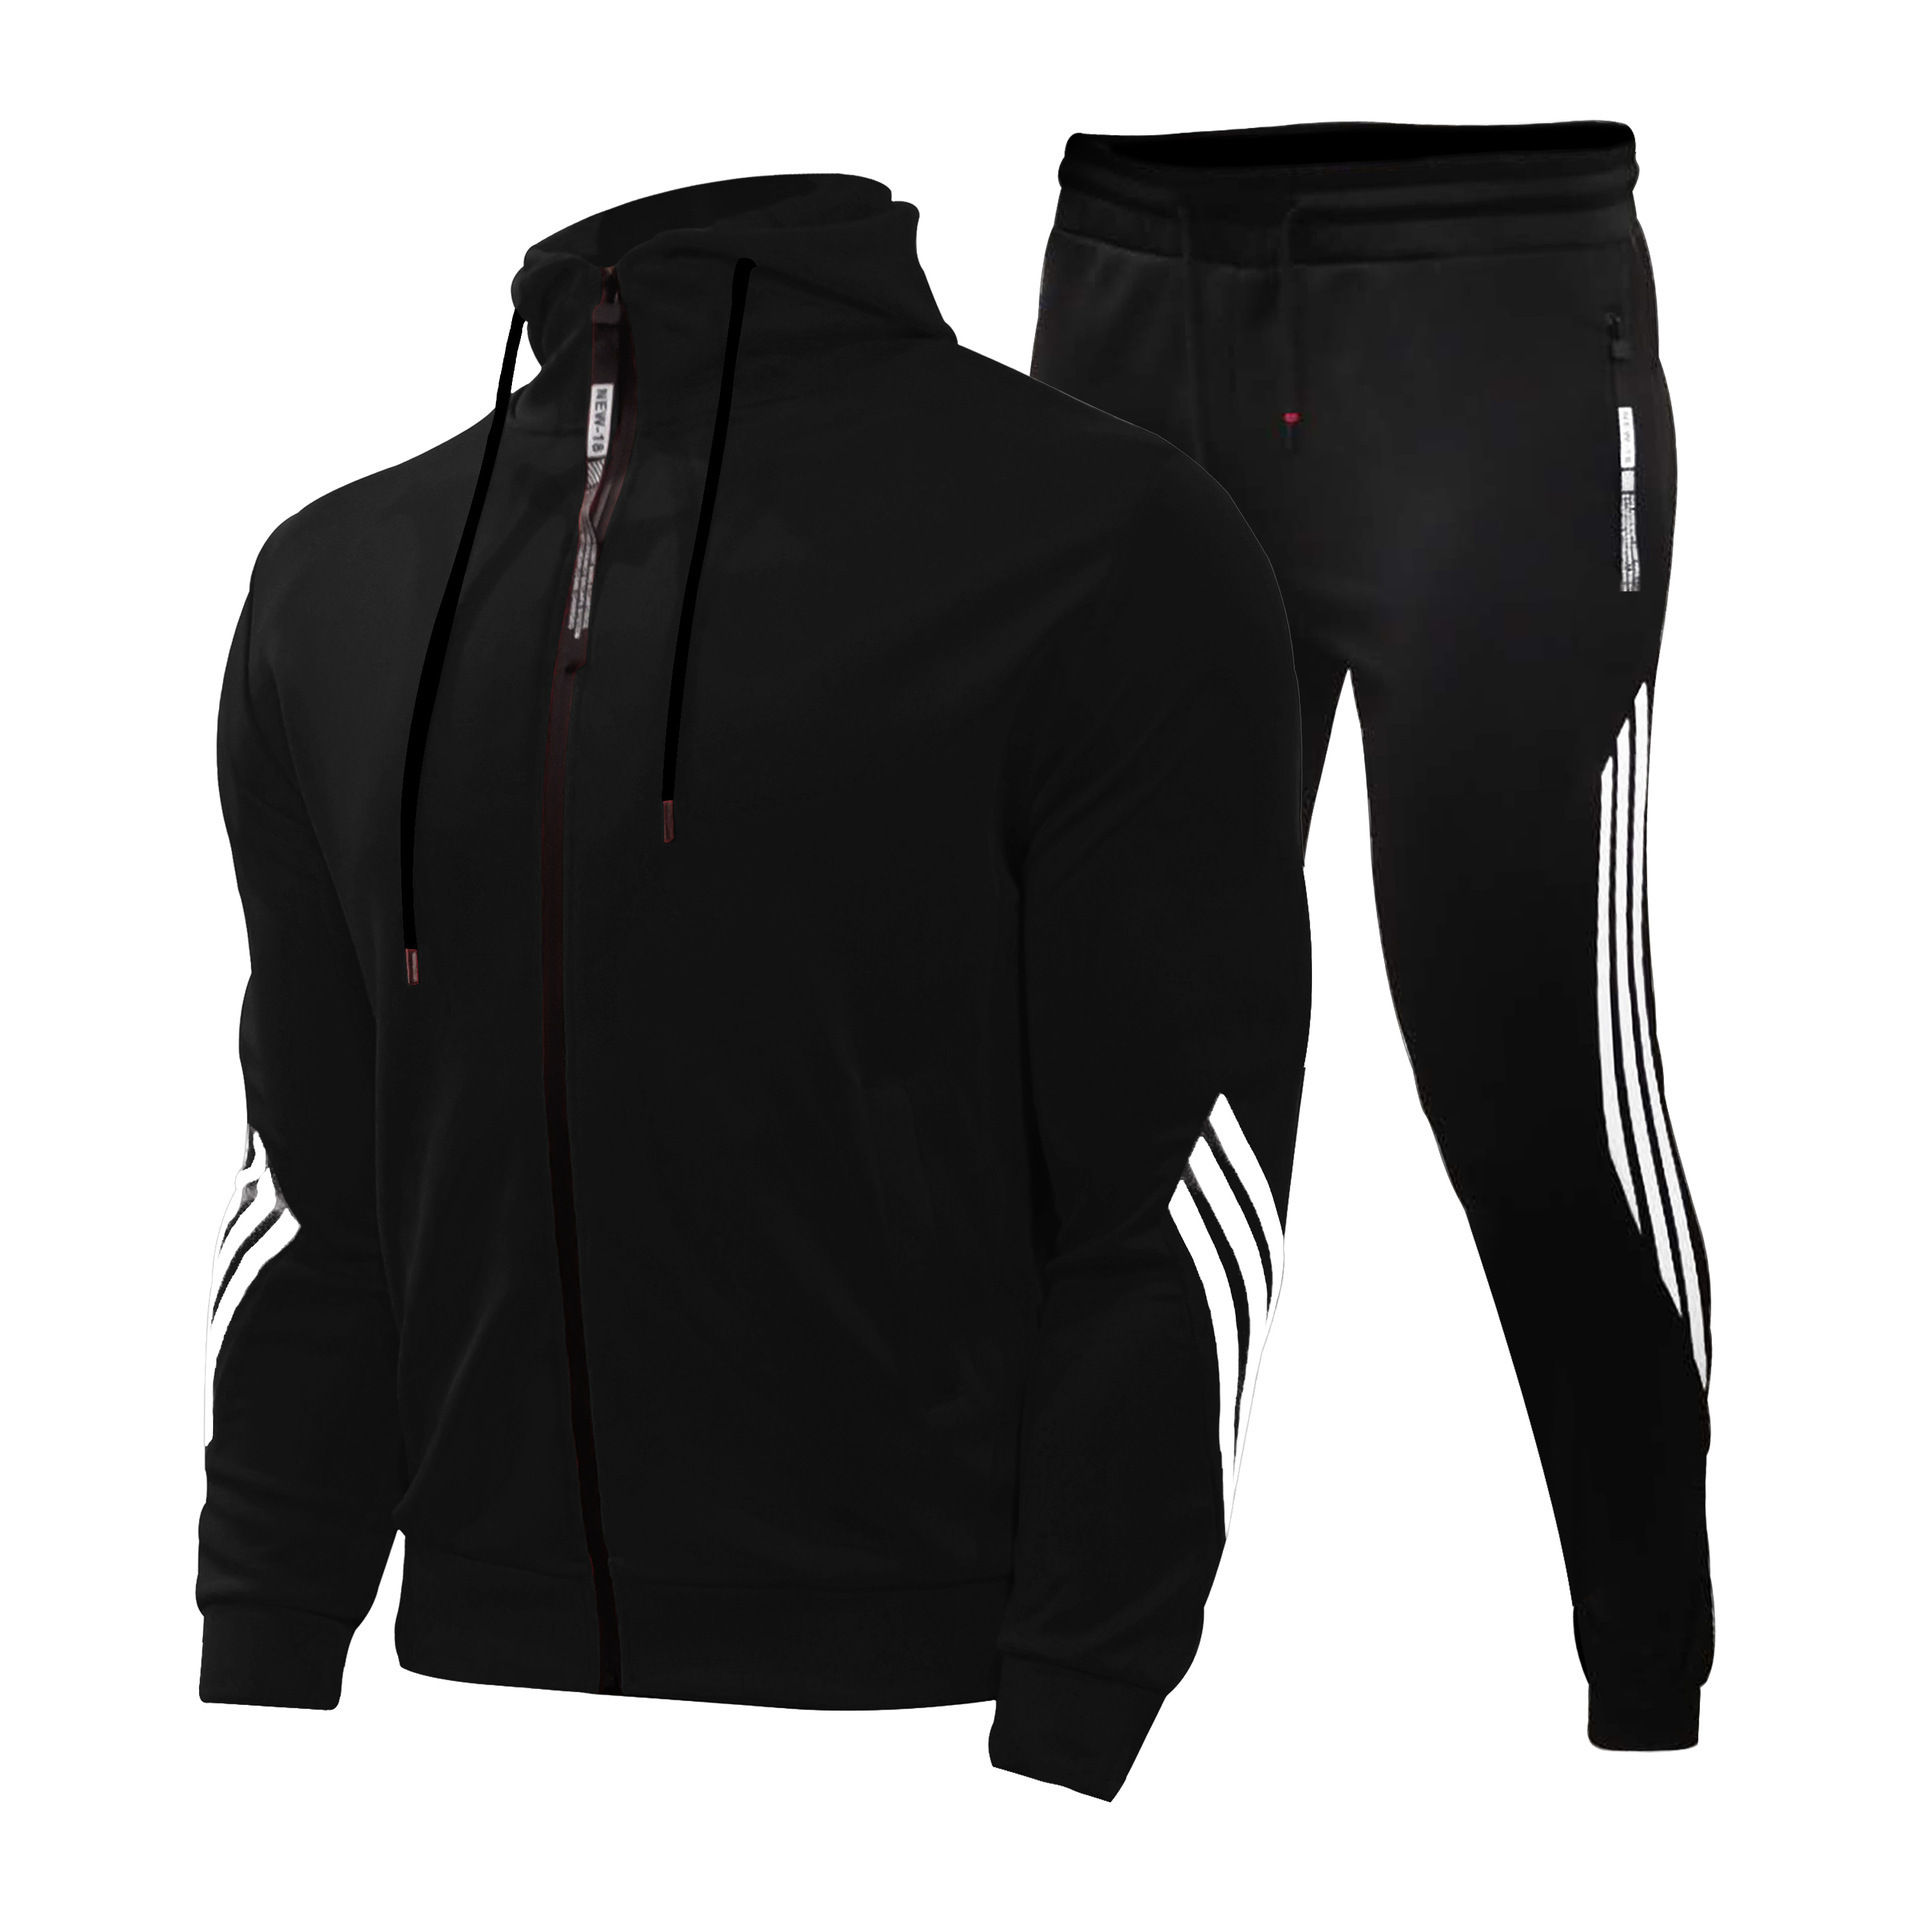 New Men's Casual Sports Suit Hooded Sweater Men's And Women's Running Sportswear Suits Can Be Customized with LOGO